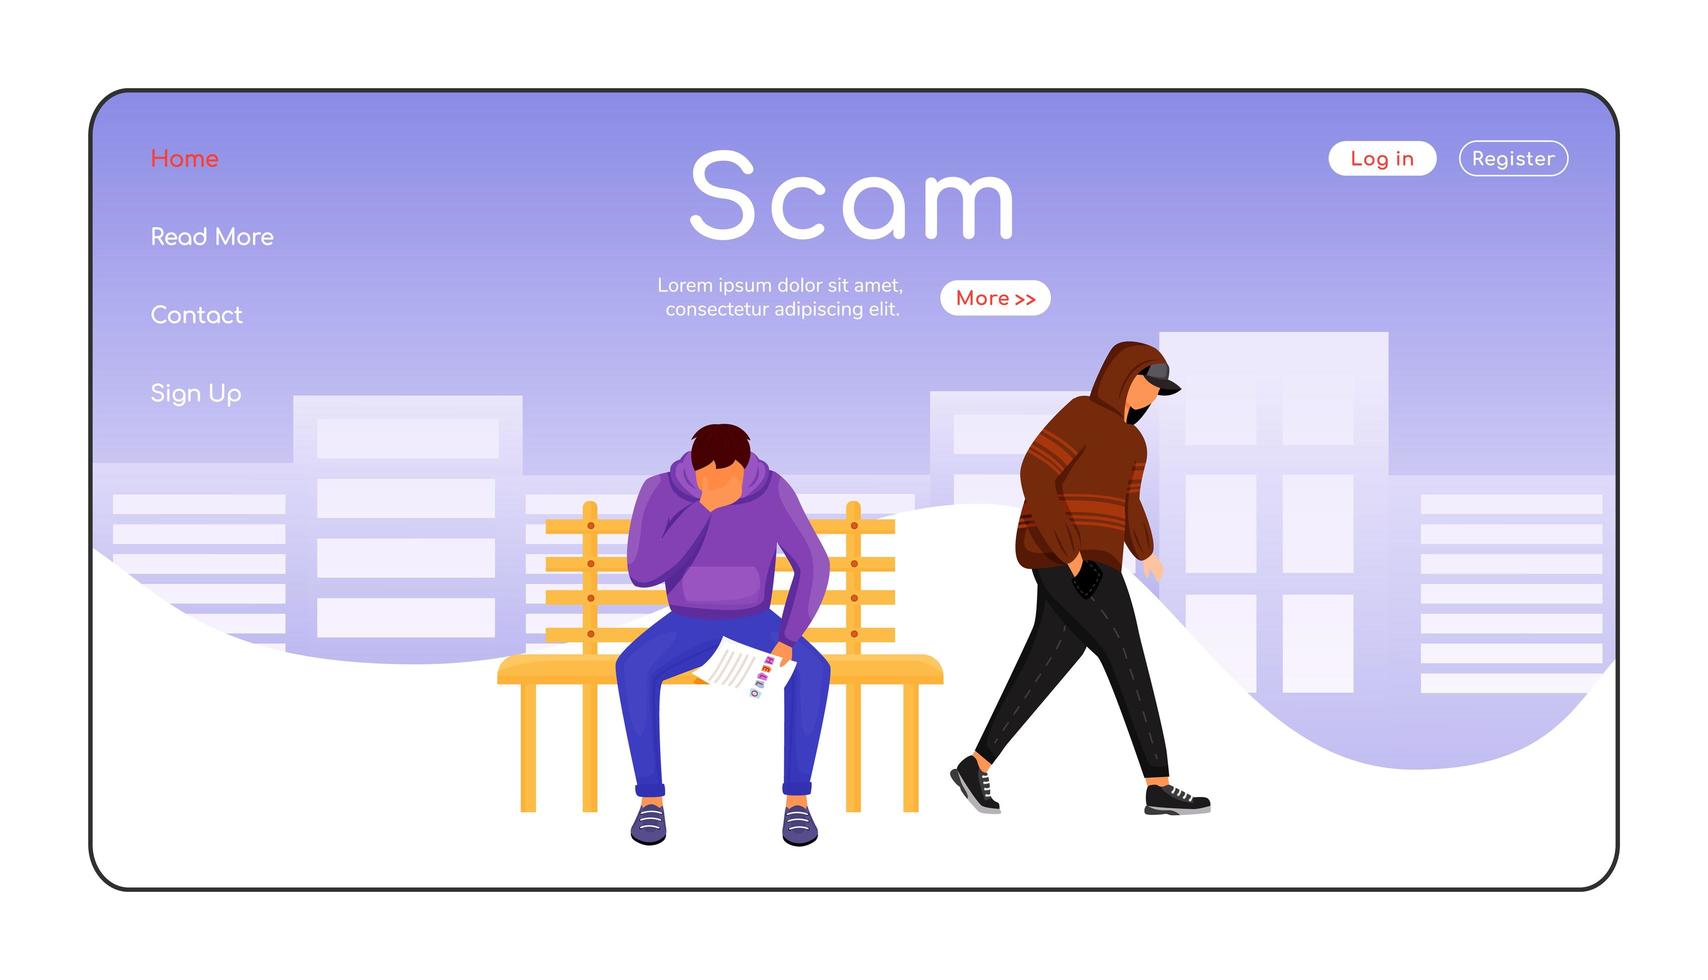 Scam landing page flat color vector template